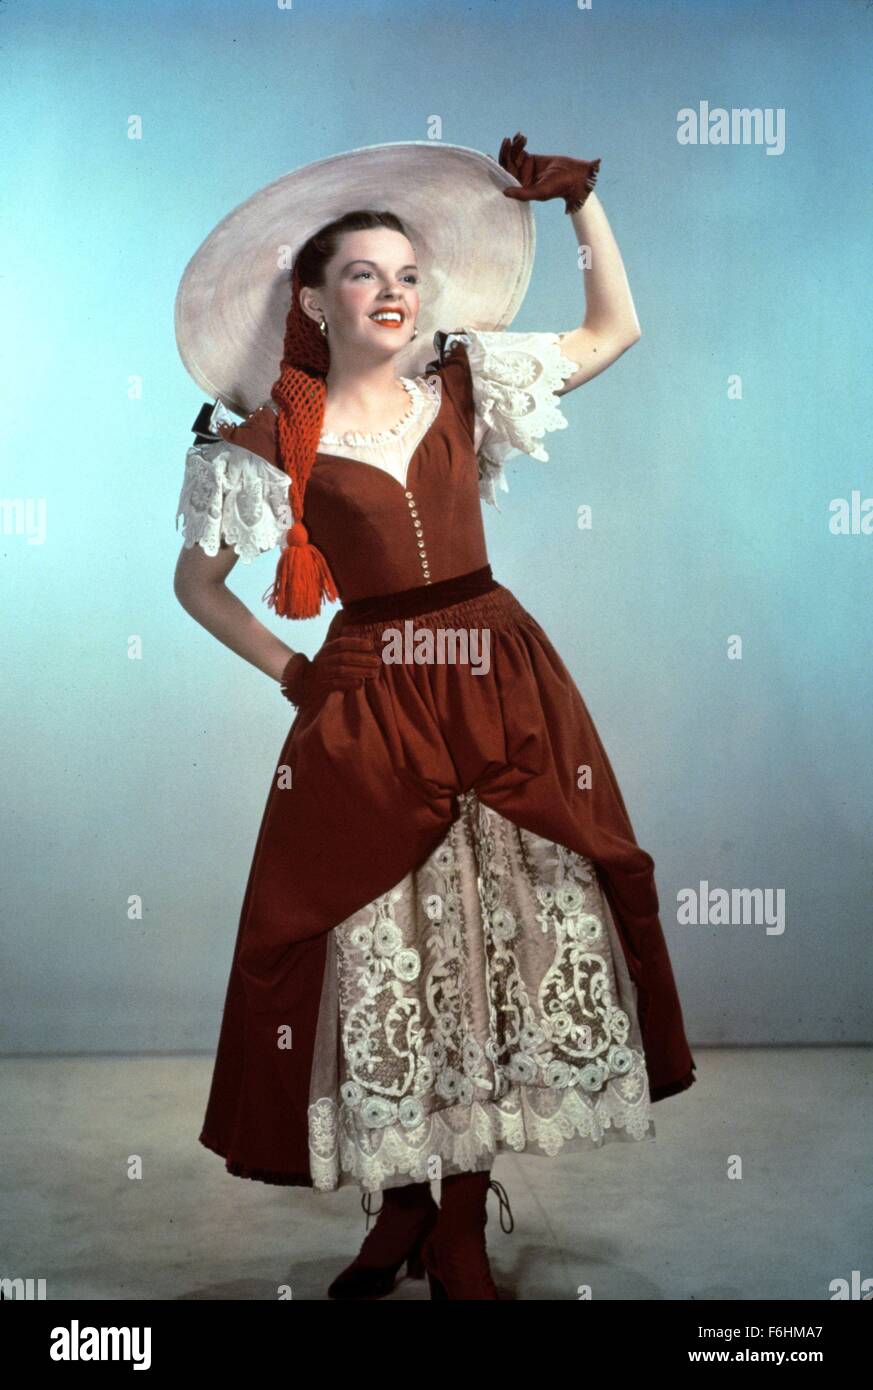 1948, Film Title: PIRATE, Director: VINCENTE MINNELLI, Studio: MGM, Pictured: JUDY GARLAND, STUDIO, PORTRAIT, HAT, COSTUME, CHARACTER, GLOVES, HAND ON HIP, BIG HAT. (Credit Image: SNAP) Stock Photo